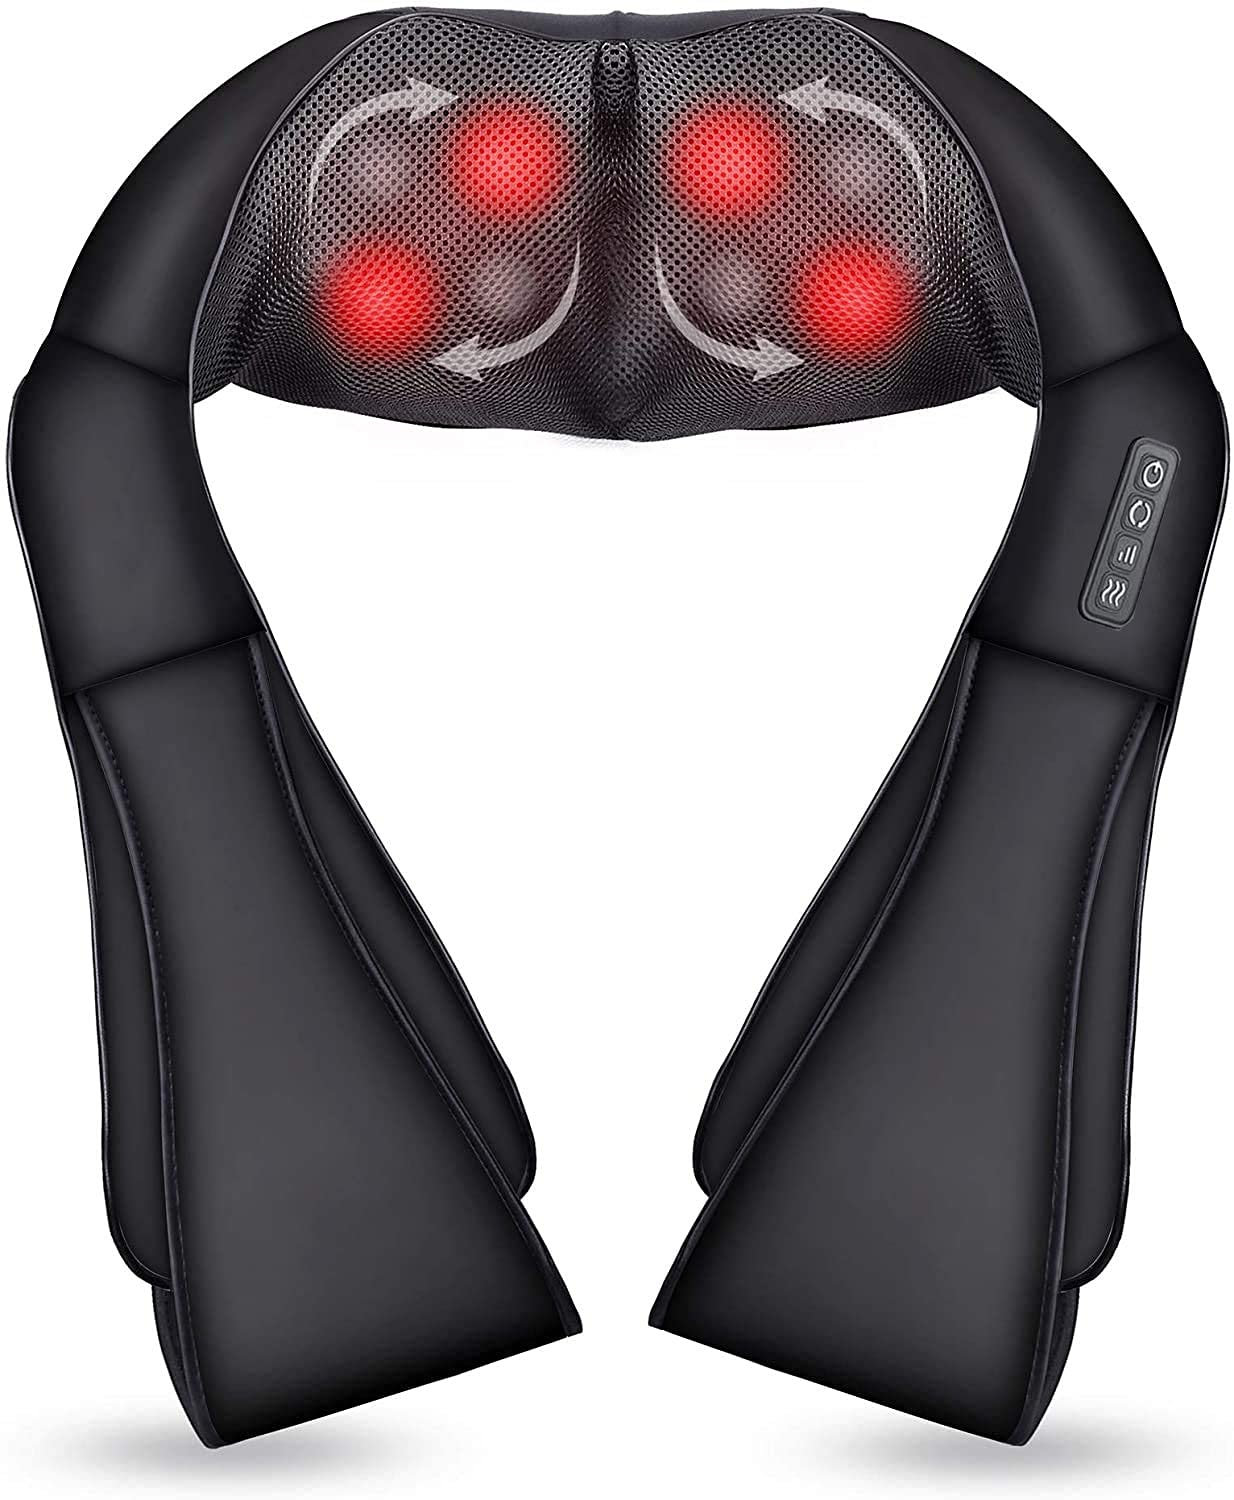 Shiatsu Back and Neck Massager with Heat Function, Deep Tissue Kneading Massager for Shoulder, Lower Back, Leg, Comfortable Leather, Muscle Pain Re...